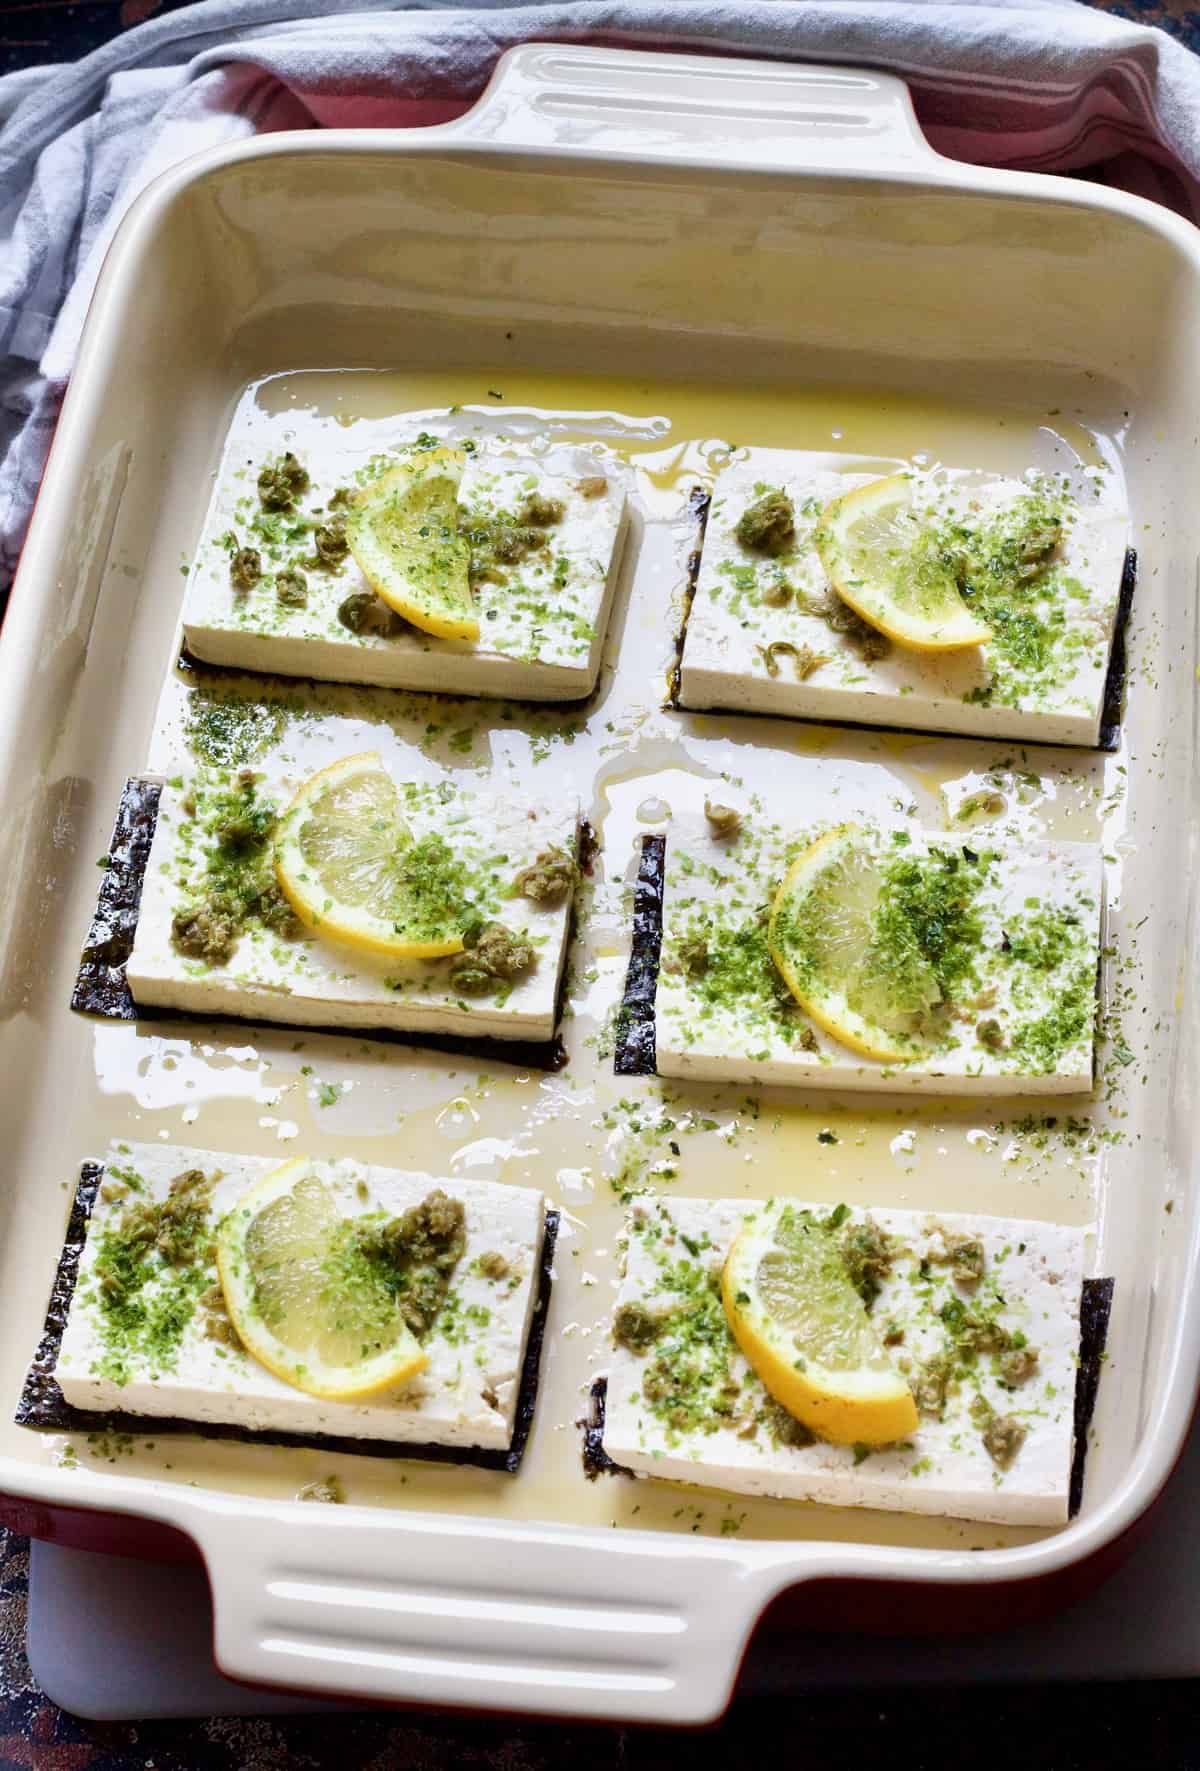 Unbaked tofu fish slices in a baking dish ready for the oven.